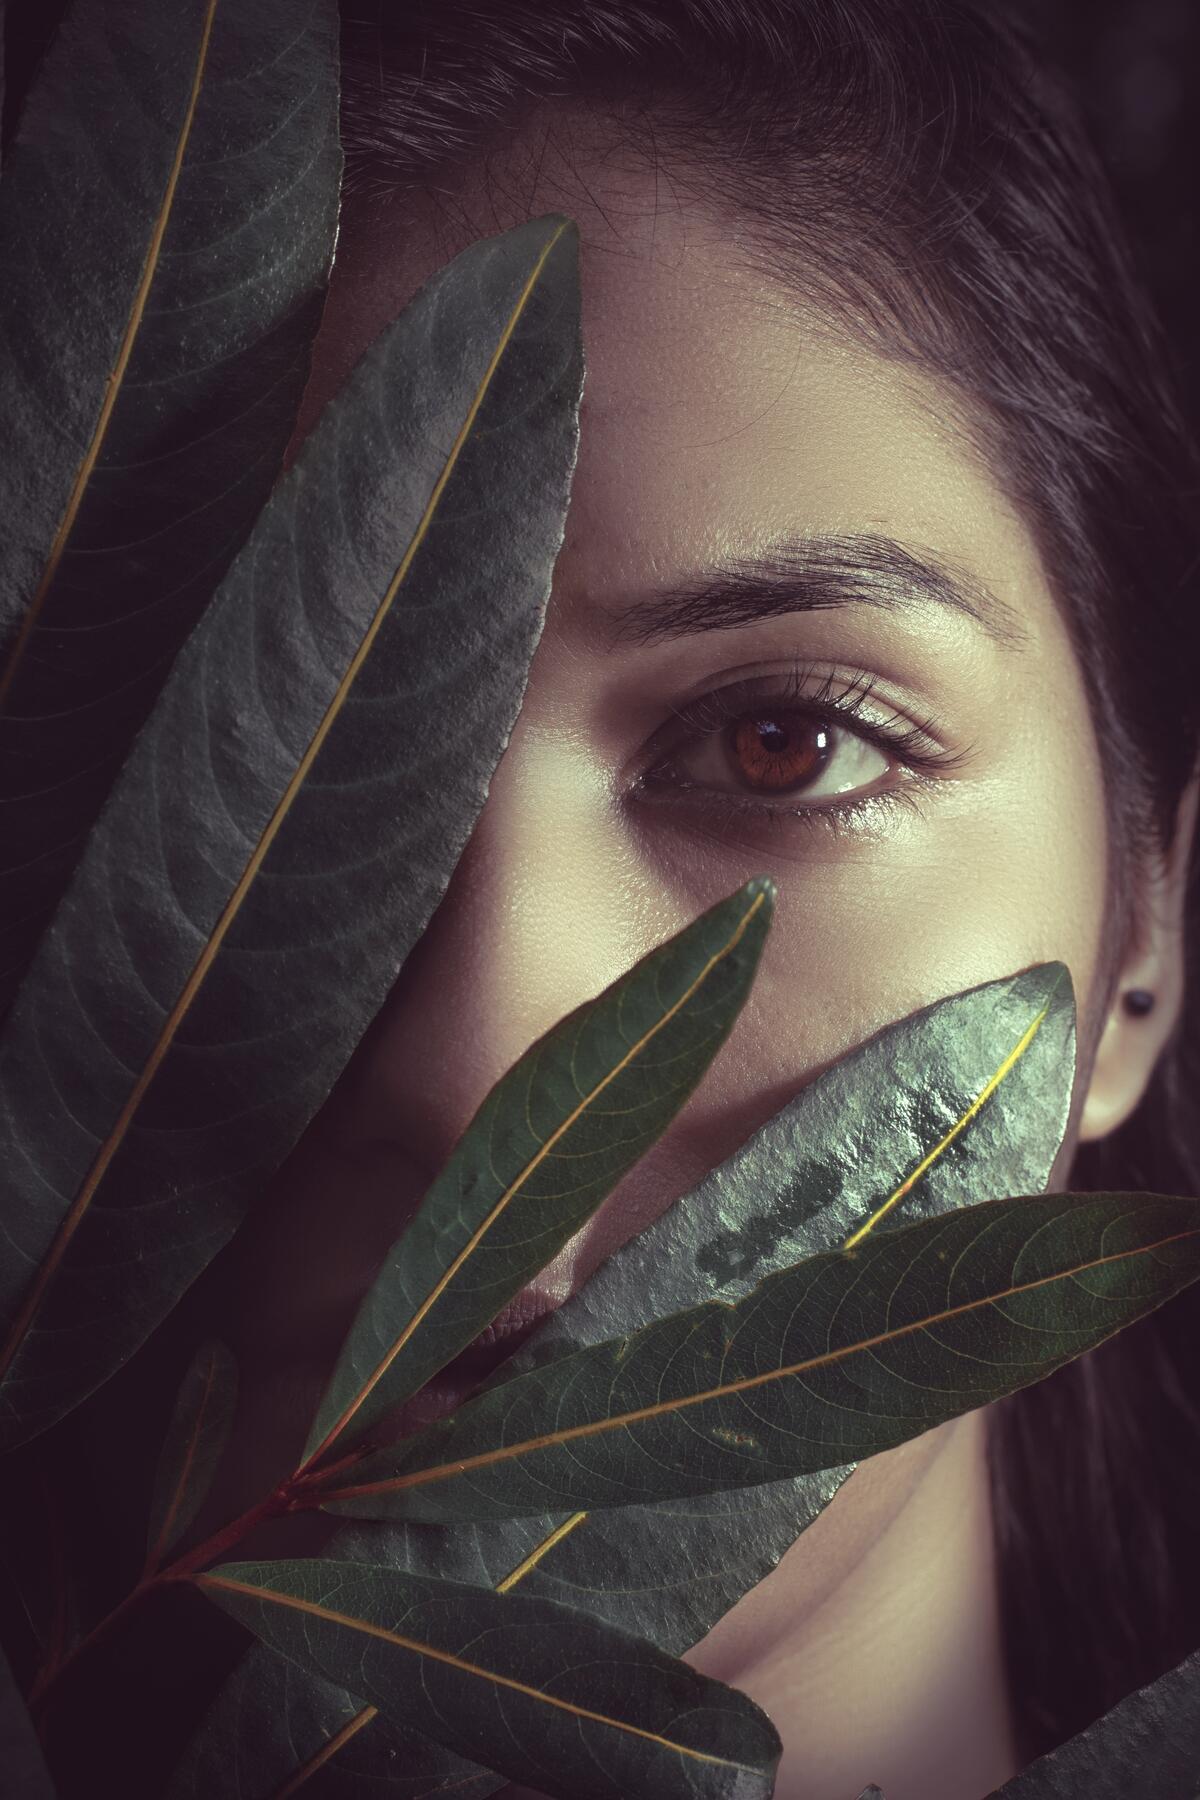 A girl with brown eyes hides her face behind a plant